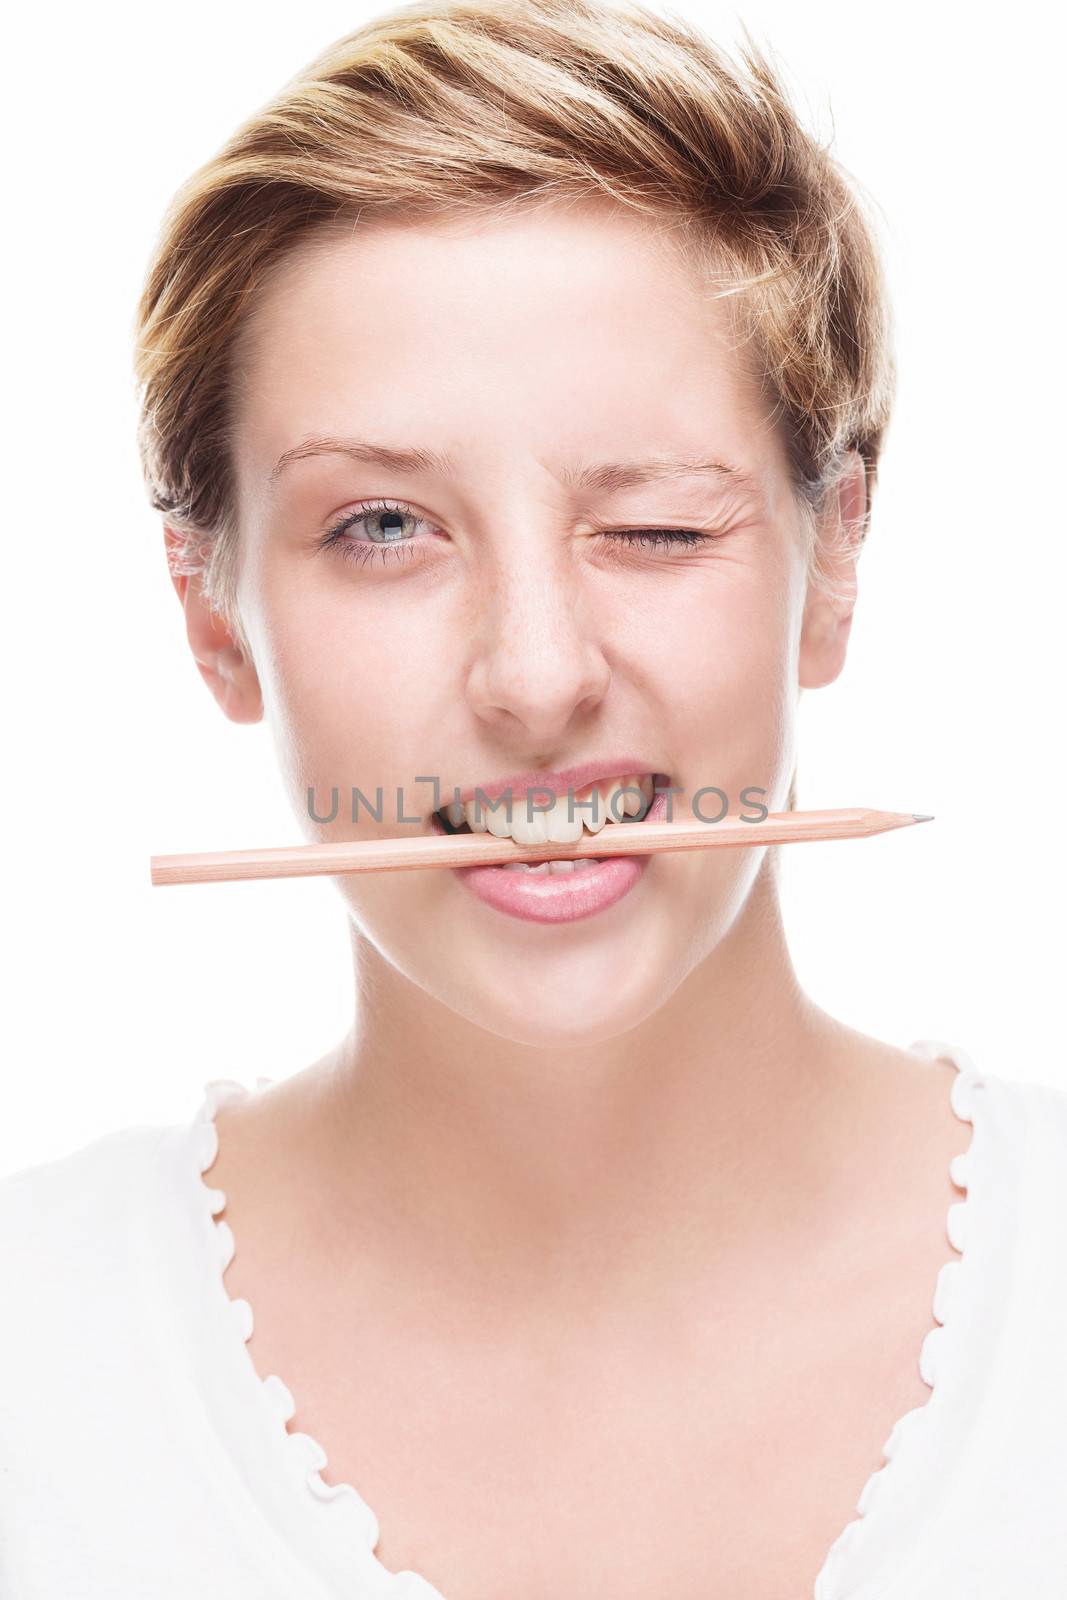 blonde happy woman winking with pencil in her mouth on white background